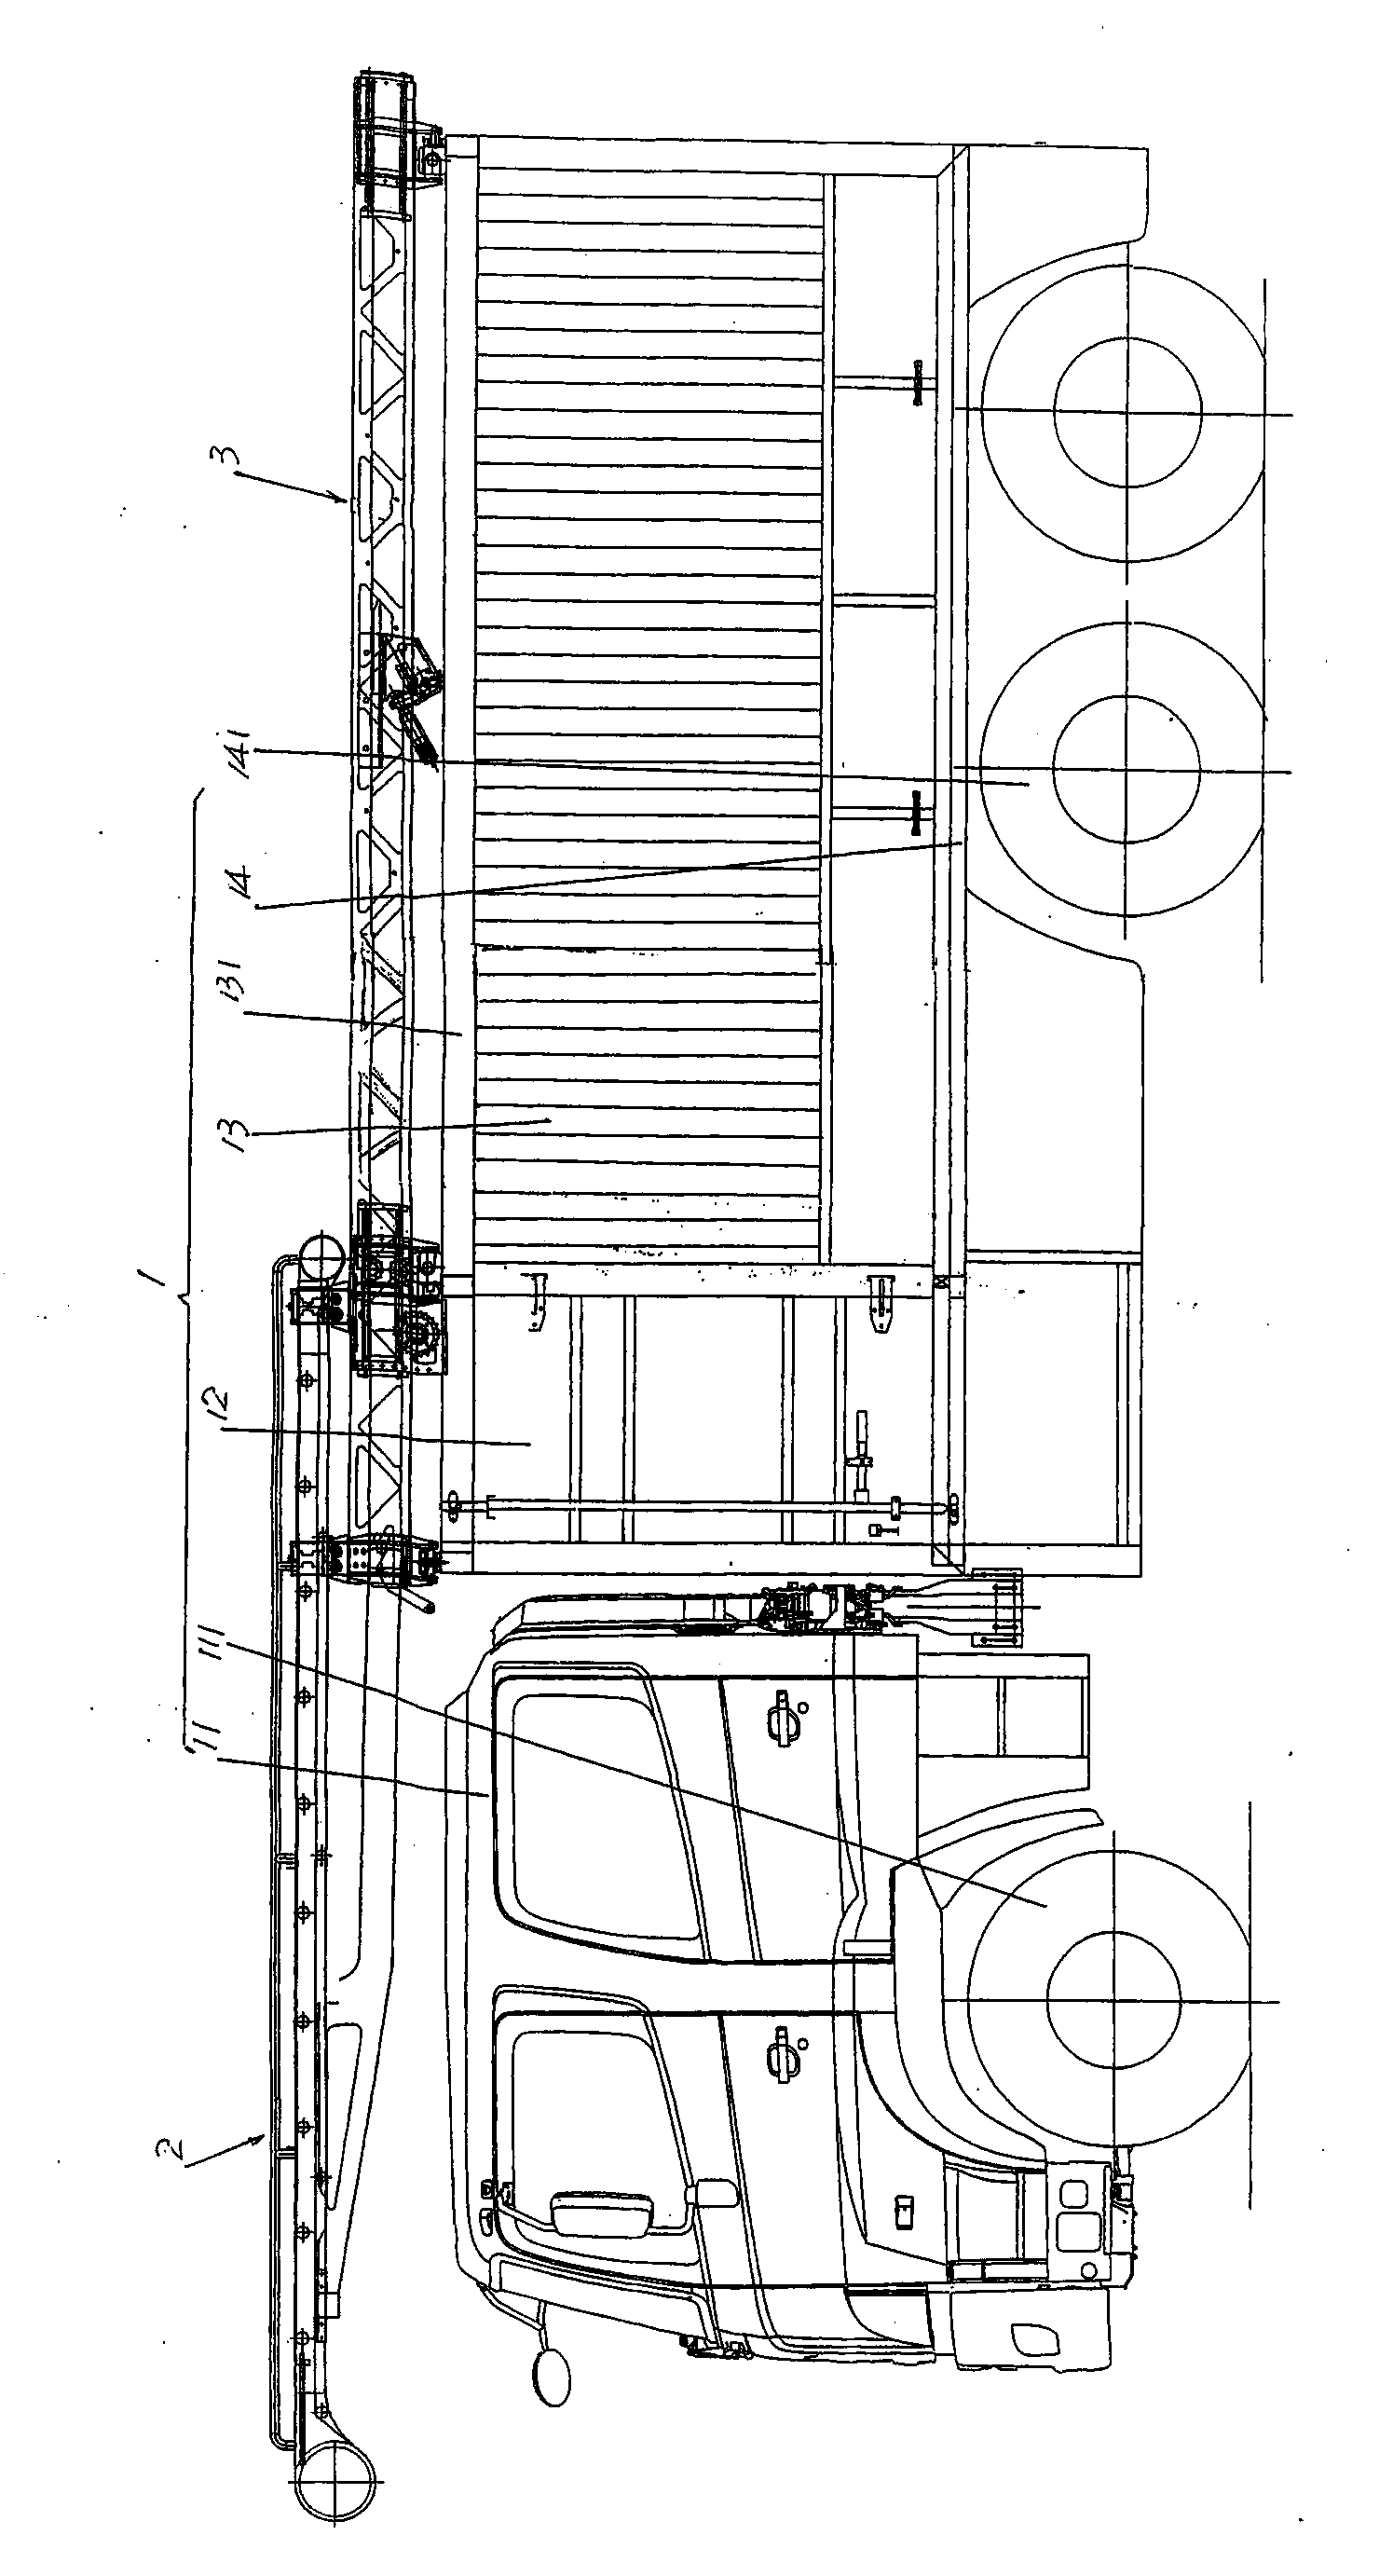 Fire engine for automatically spreading fire hose